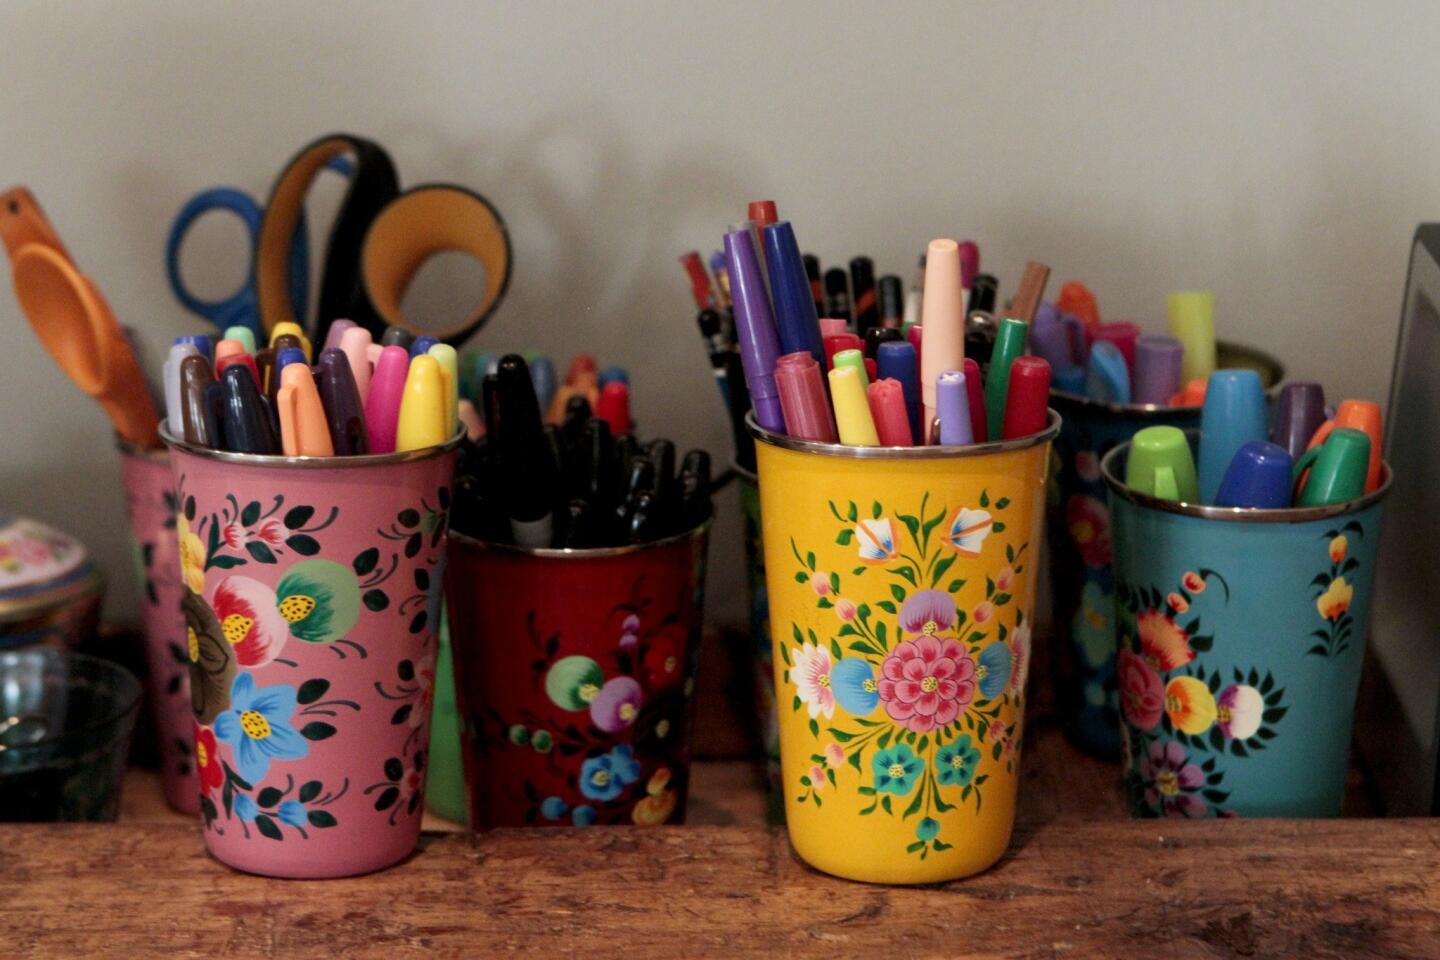 Pen containers